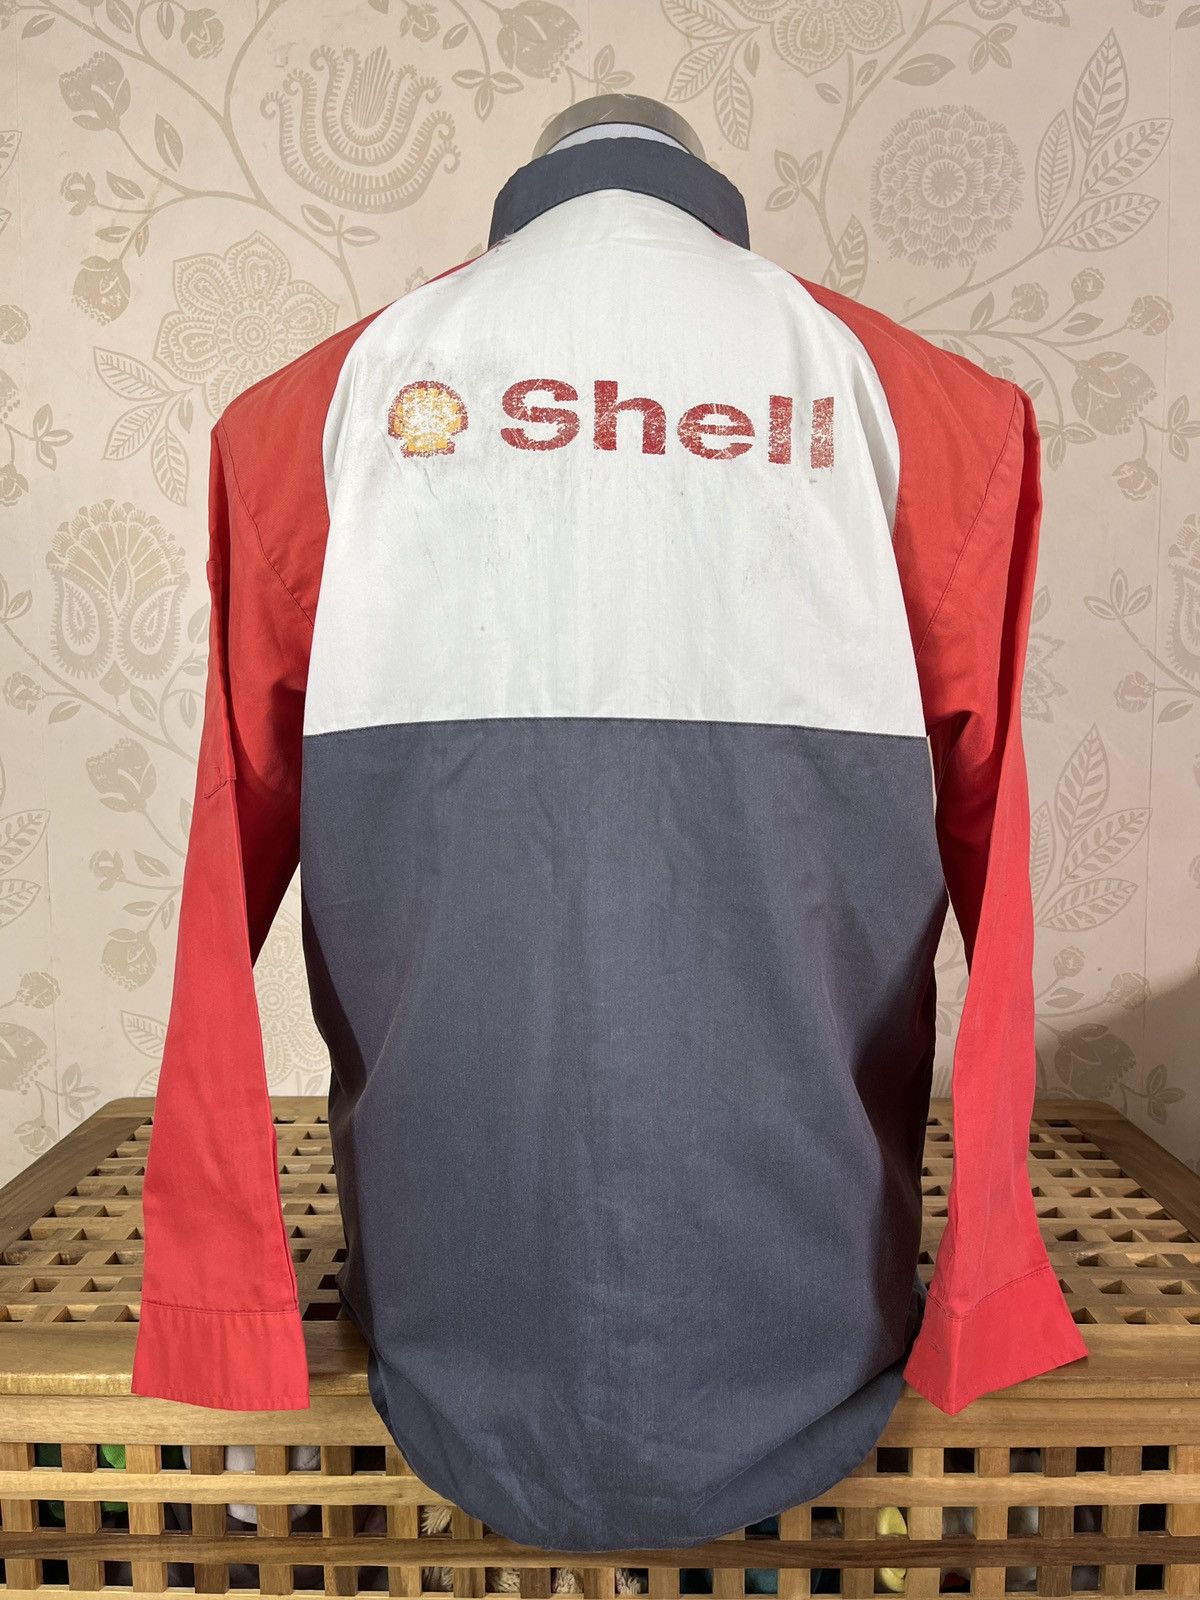 Shell Uniform Workers Vintage Japanese Outlet 1990s - 2